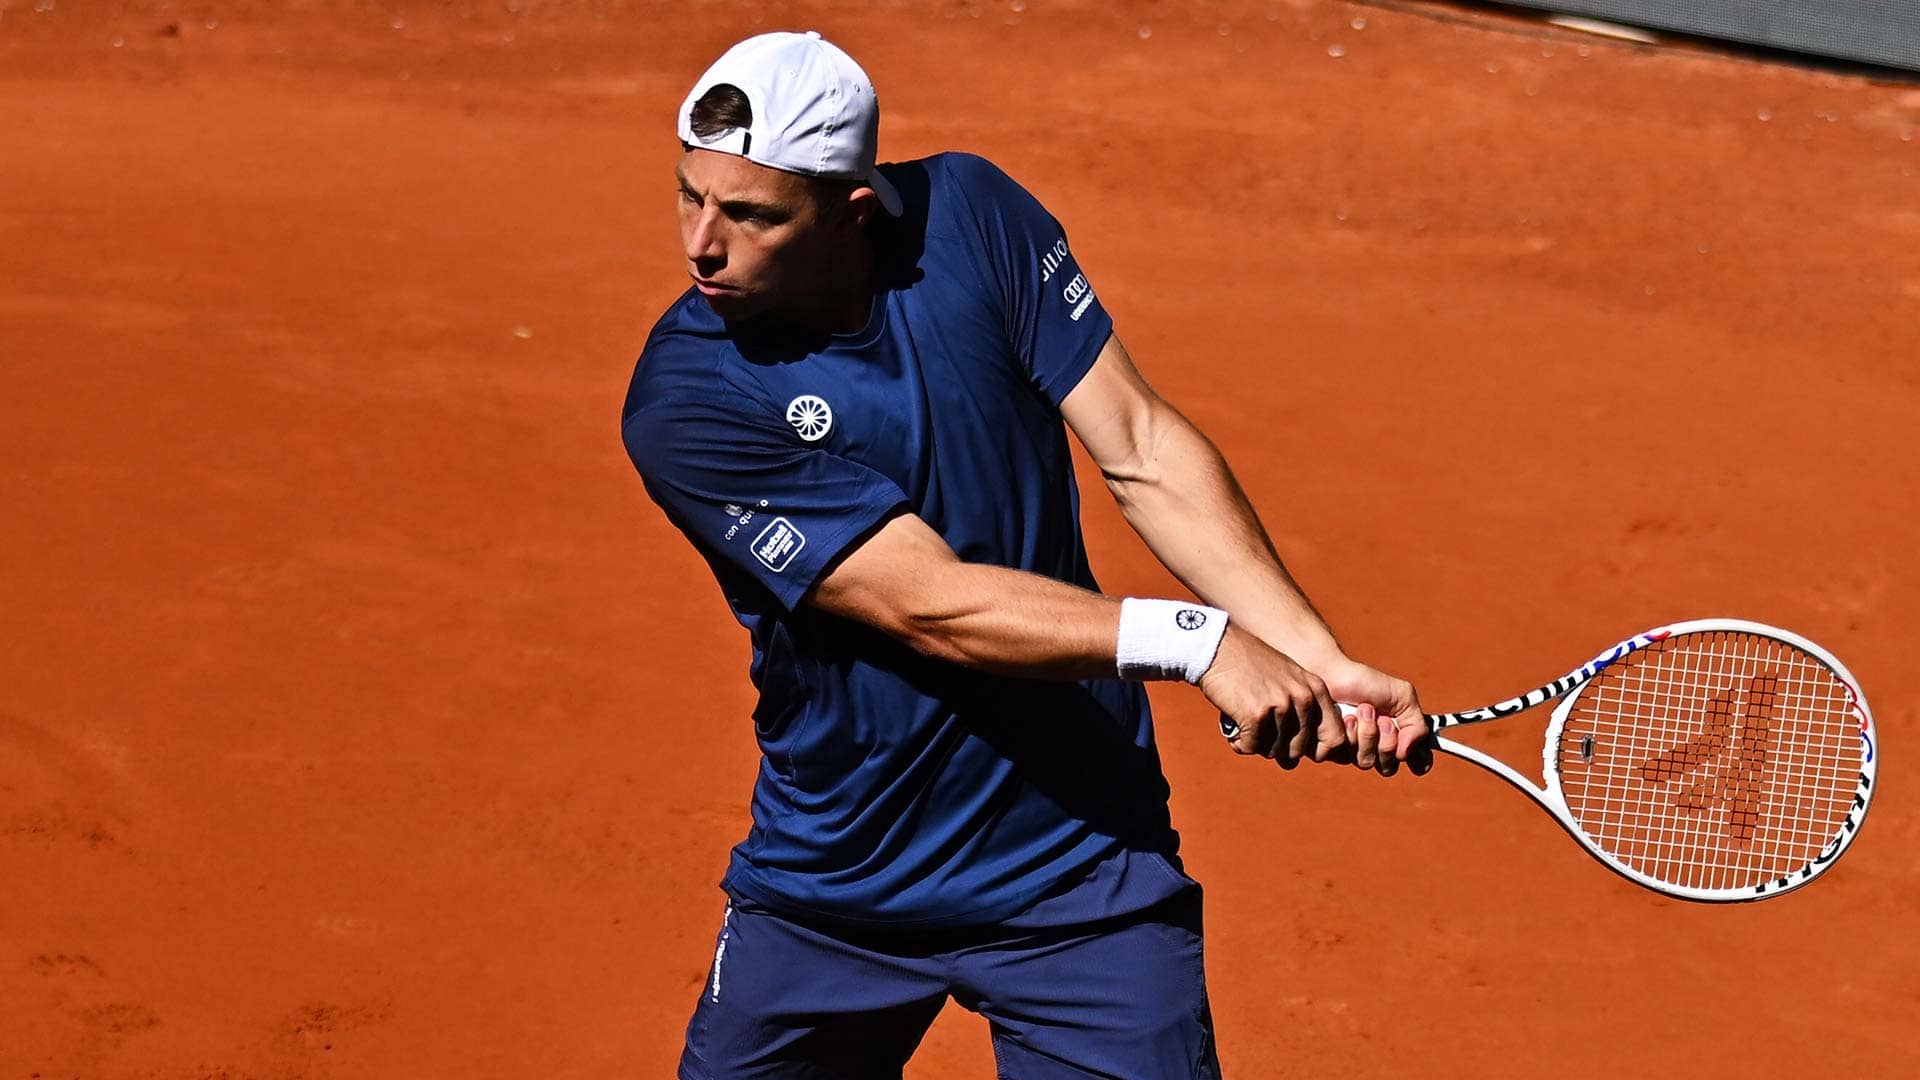 Griekspoor claws past Rune in Madrid, Rublev advances